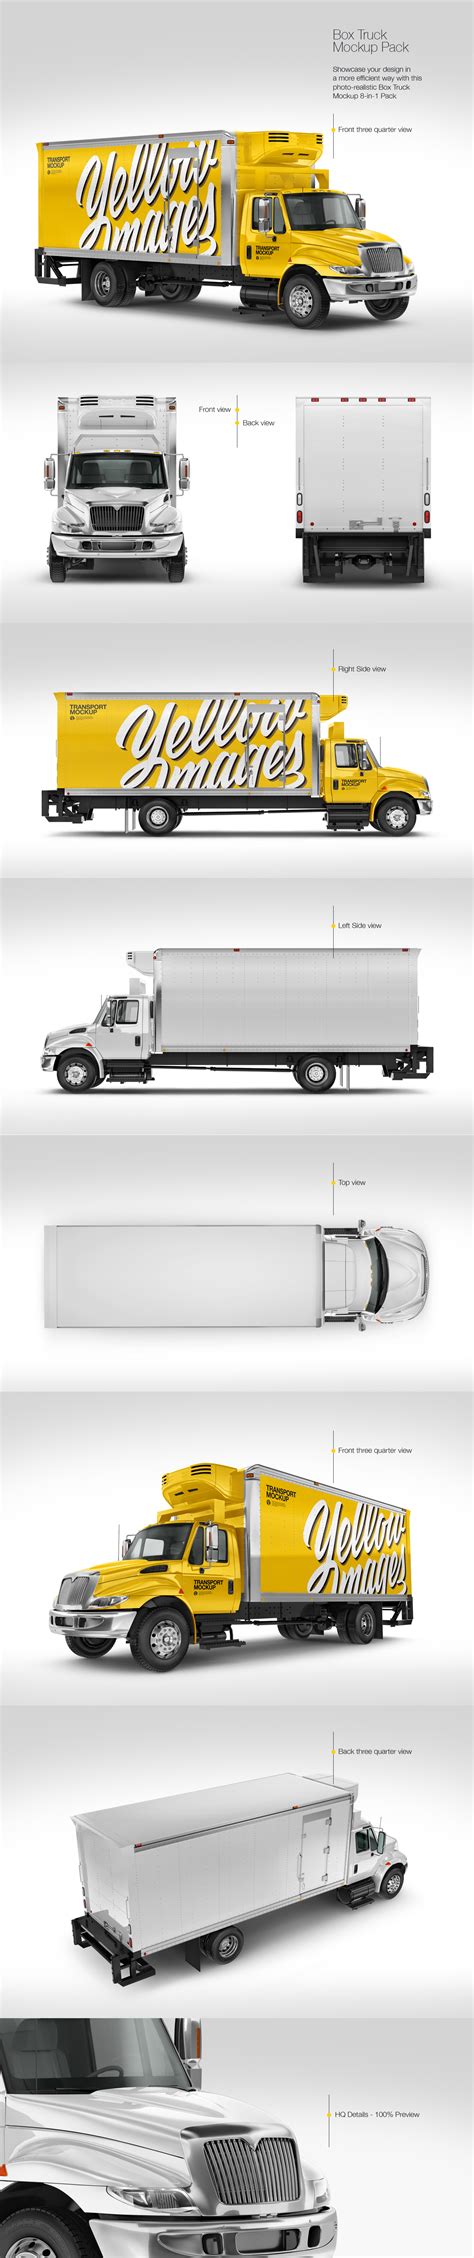 Box Truck Mockup Free Download Free And Premium PSD Mockup Templates And Design Assets